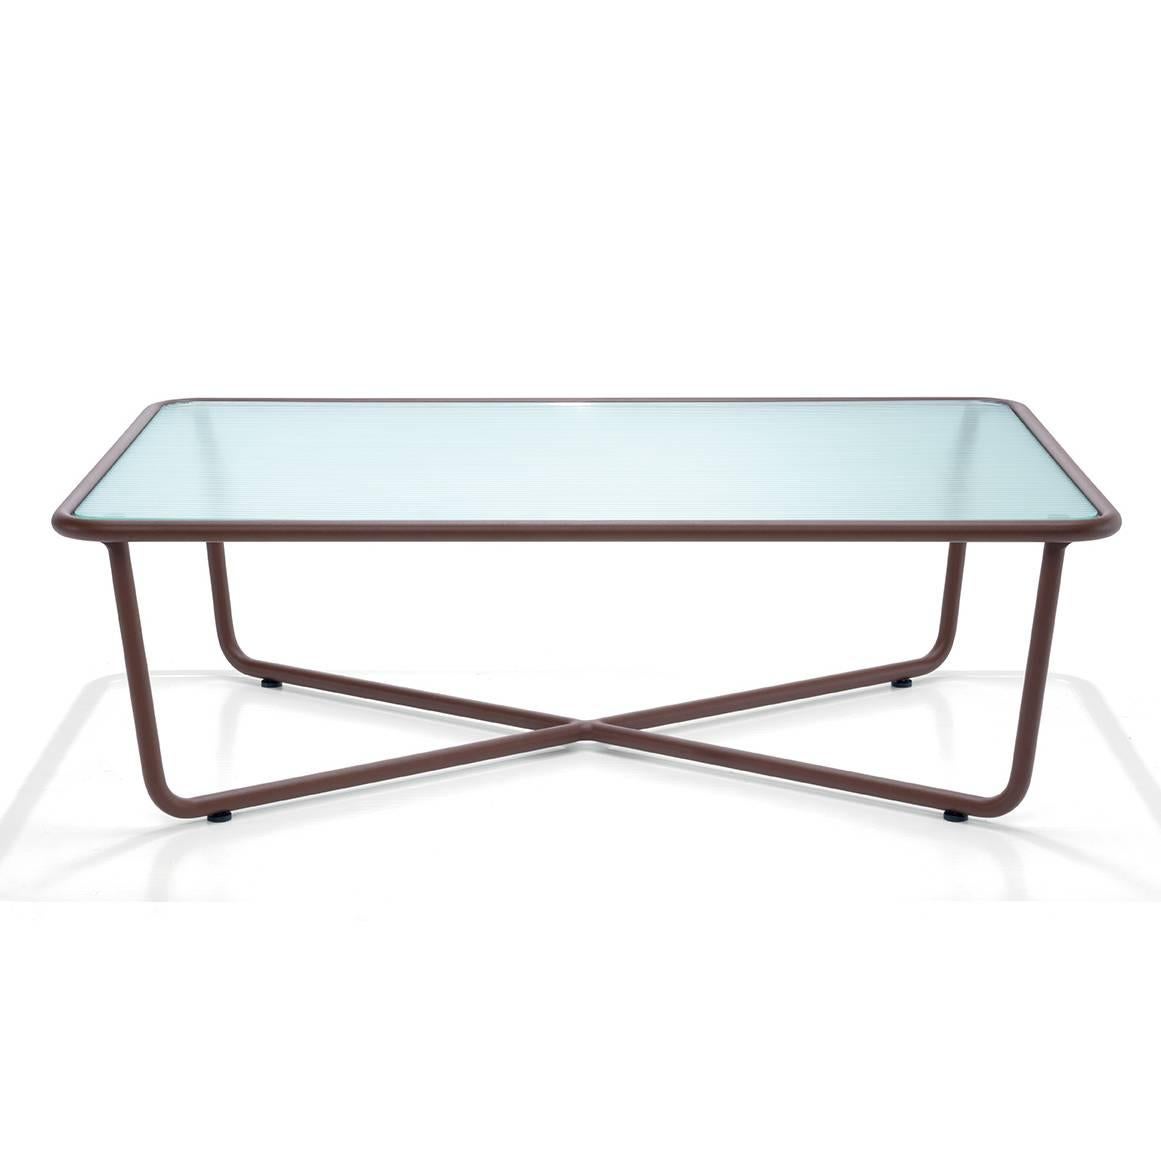 The coffee table become an indispensable element for outdoors: sunglass, the new collection by Rodolfo Dordoni, combines with simplicity different materials such as a glass top and a metal structure. The glass top, available in two finishes - in